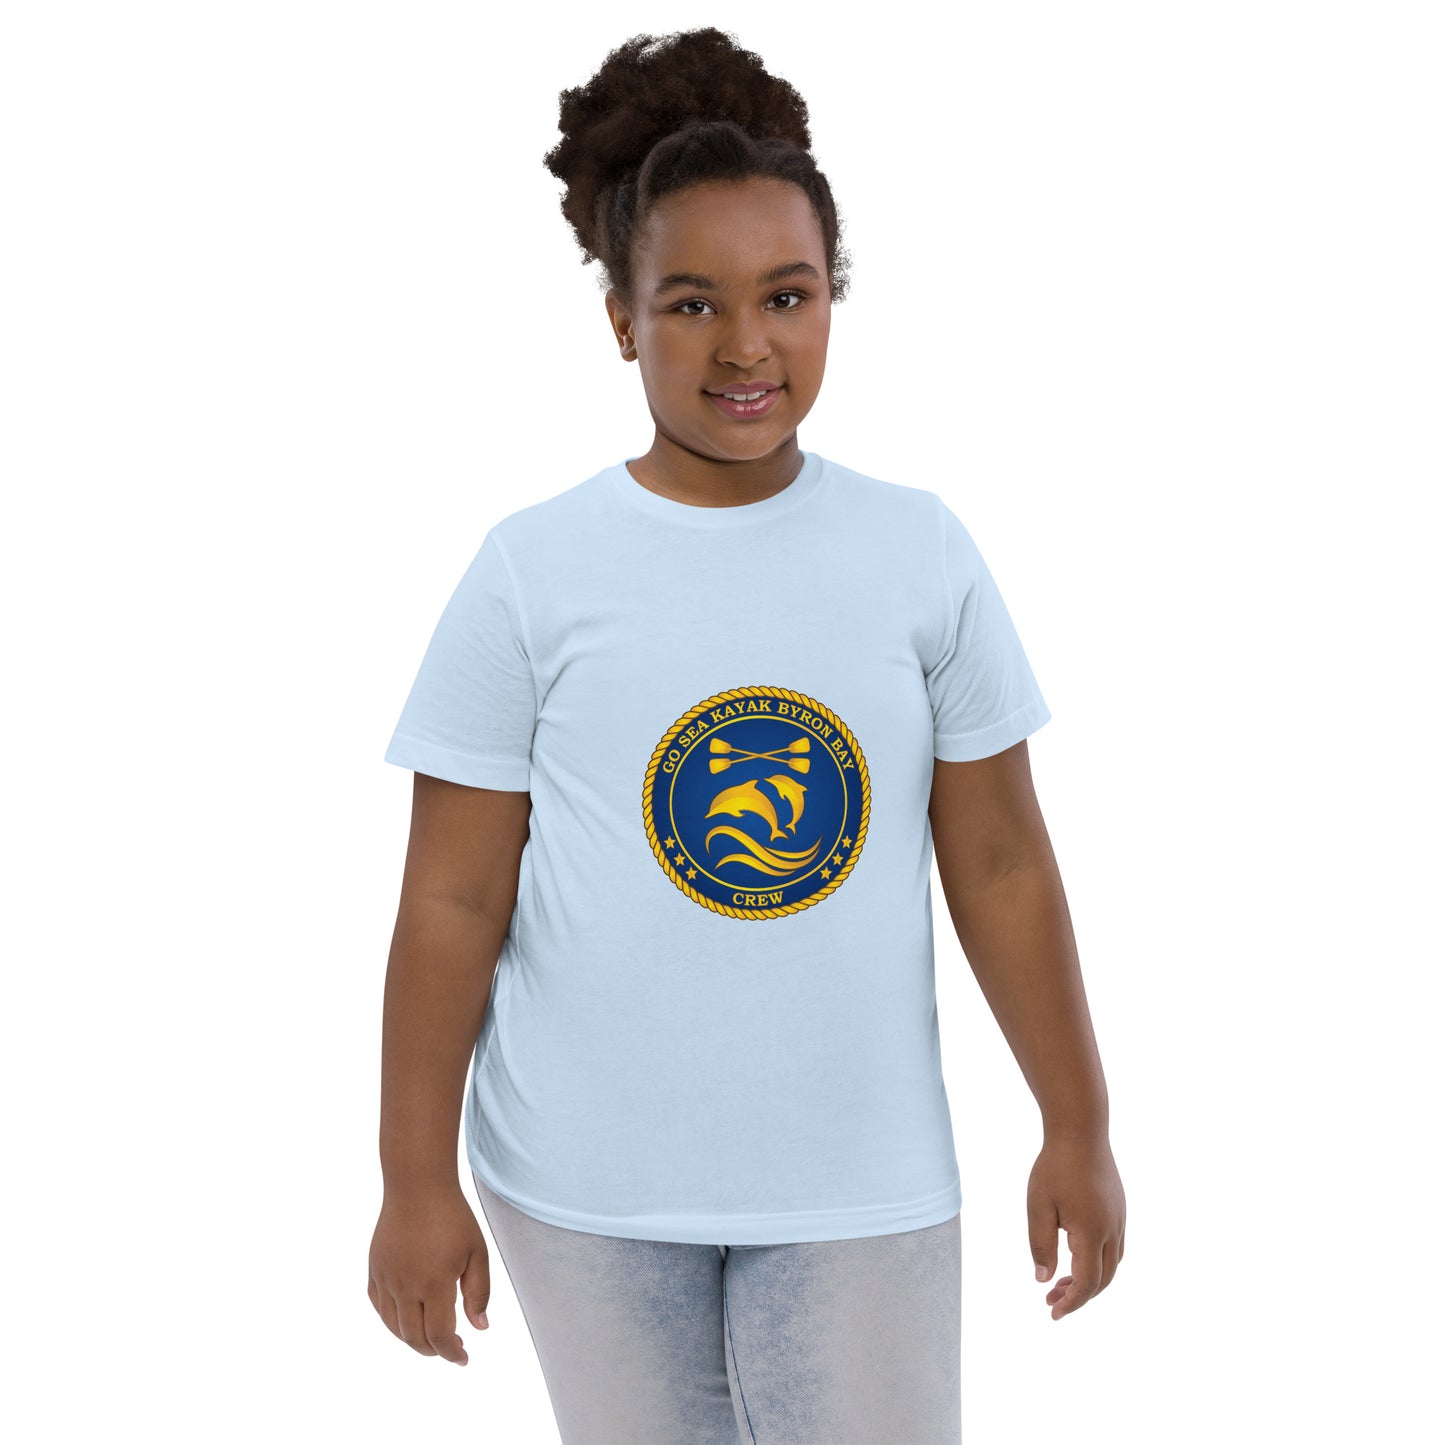  Kids T-Shirt - Light Blue - Front view, being warn on a girl standing with her arms by her side - Go Sea Kayak Byron Bay Crew (issue 2018-2019) logo on front - Genuine Byron Bay Merchandise | Produced by Go Sea Kayak Byron Bay 